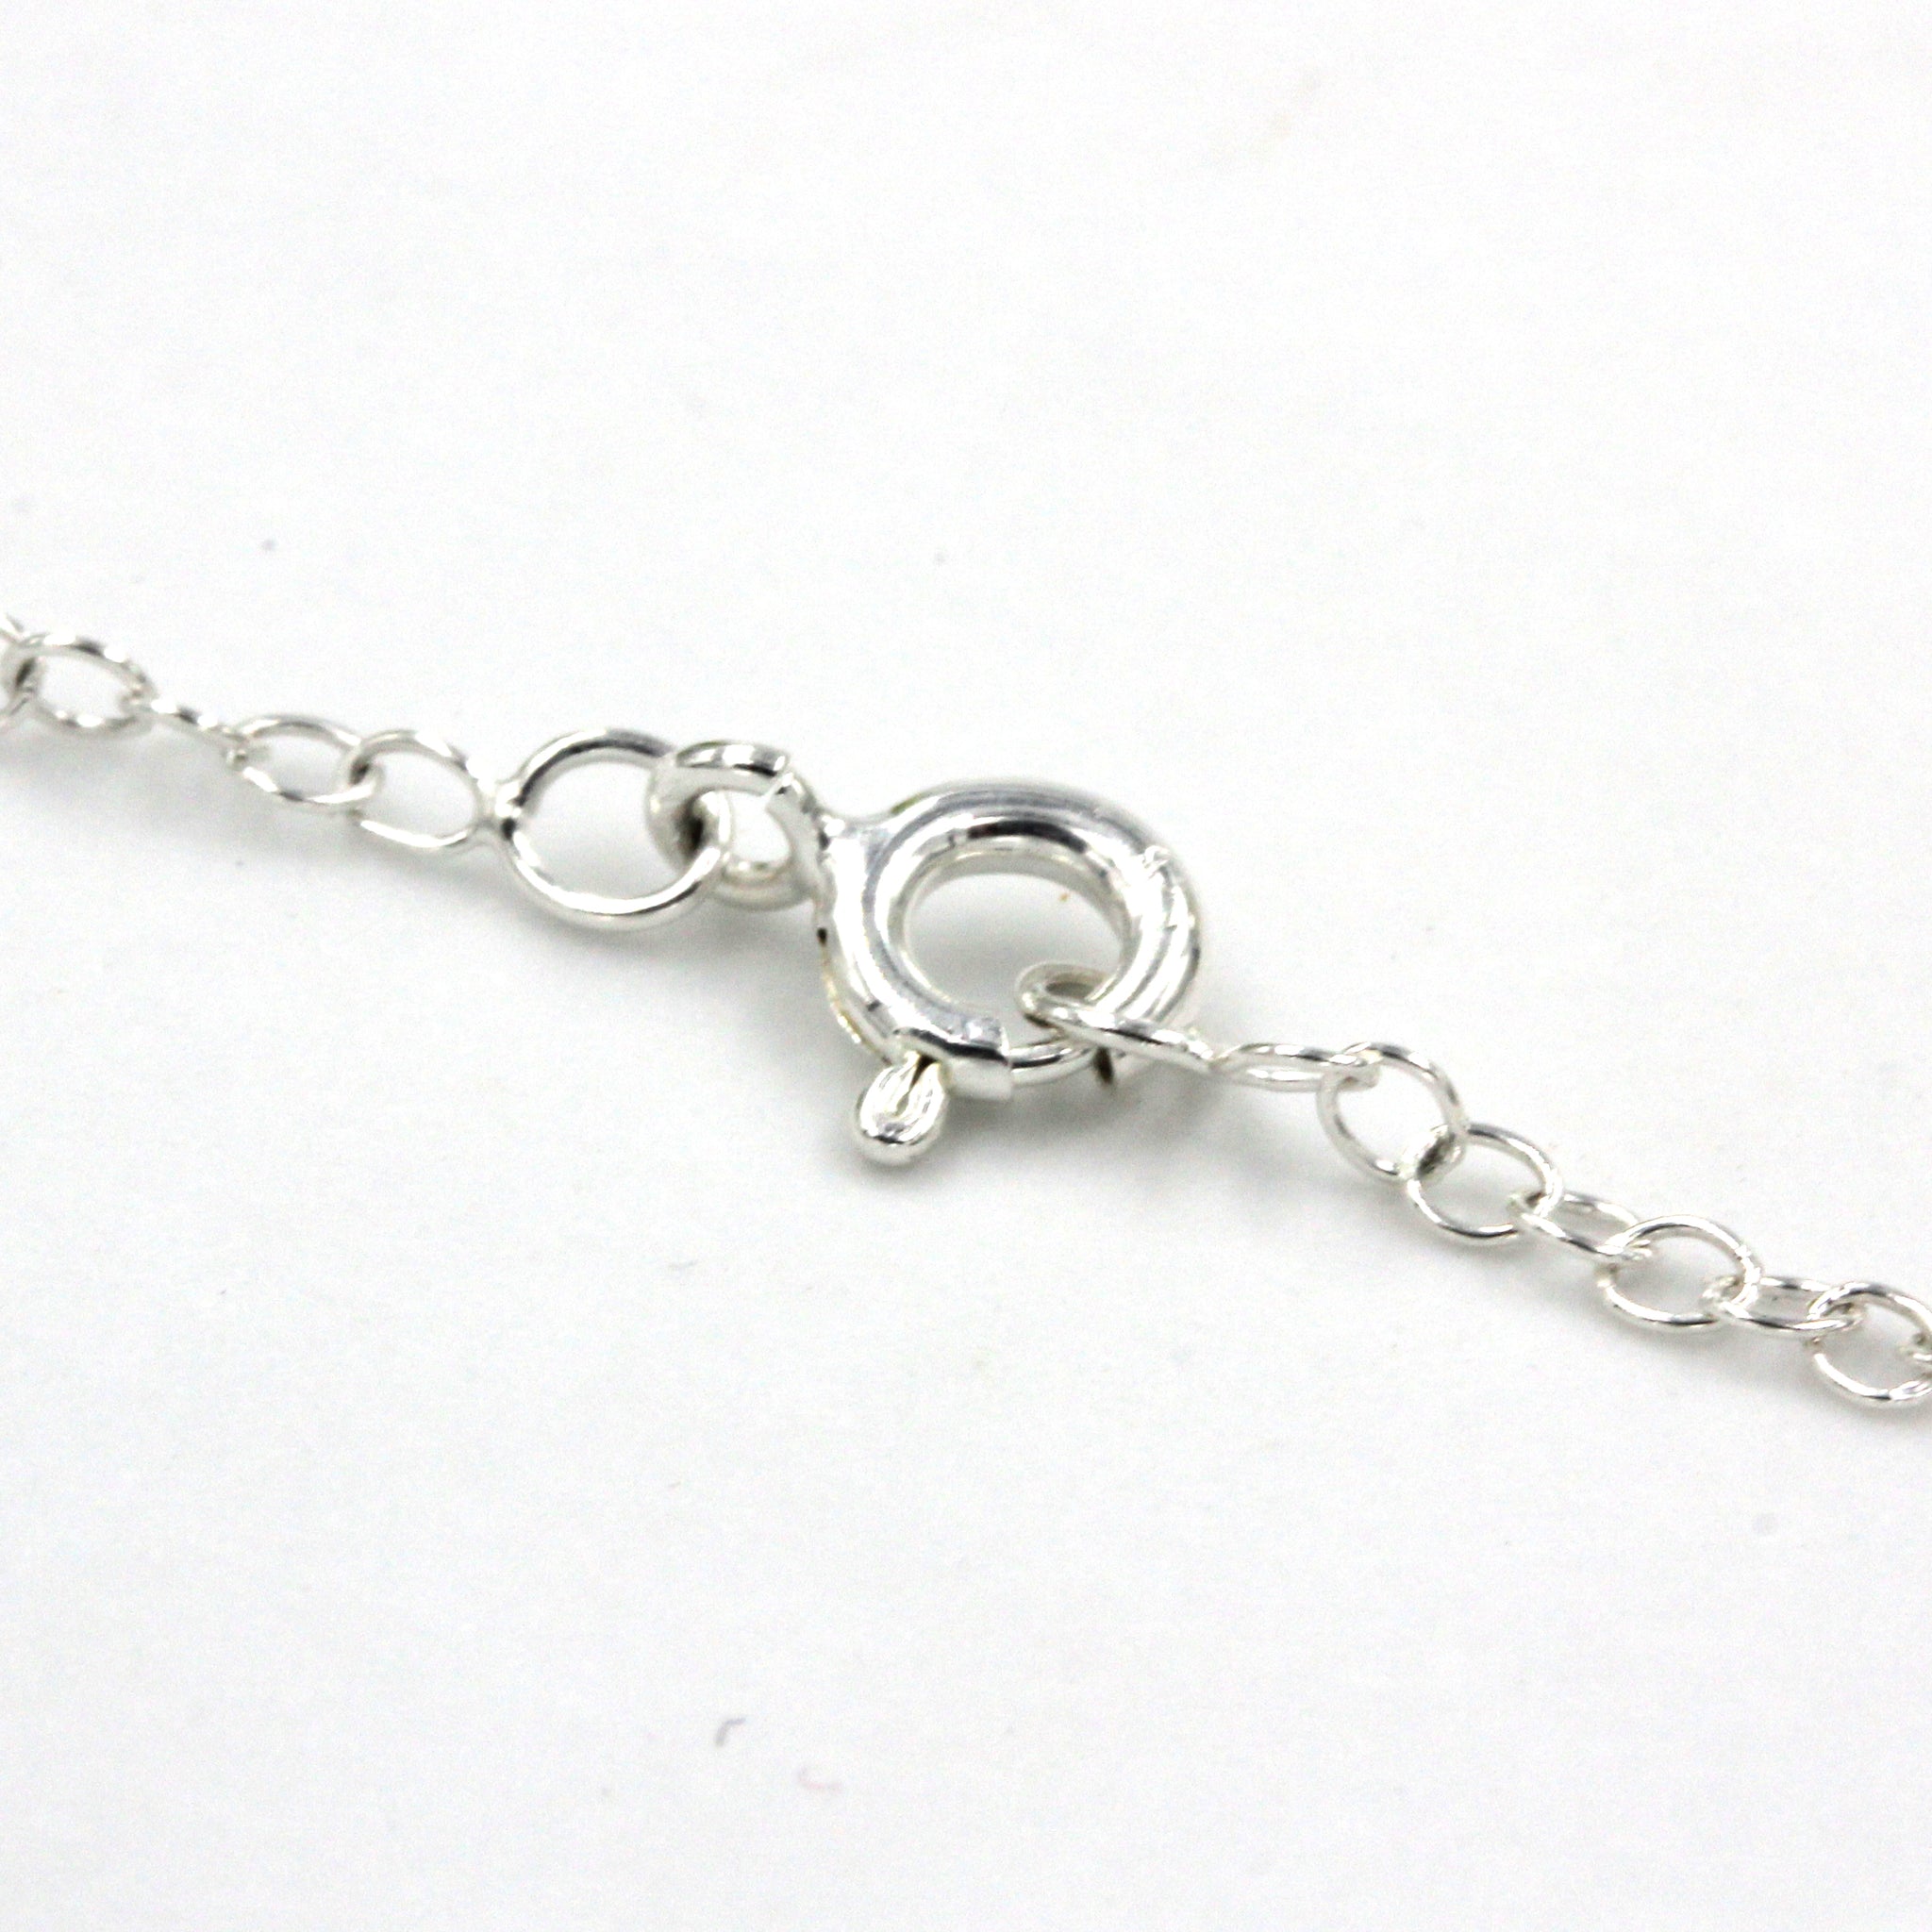 Close up details of a sterling silver necklace clasp